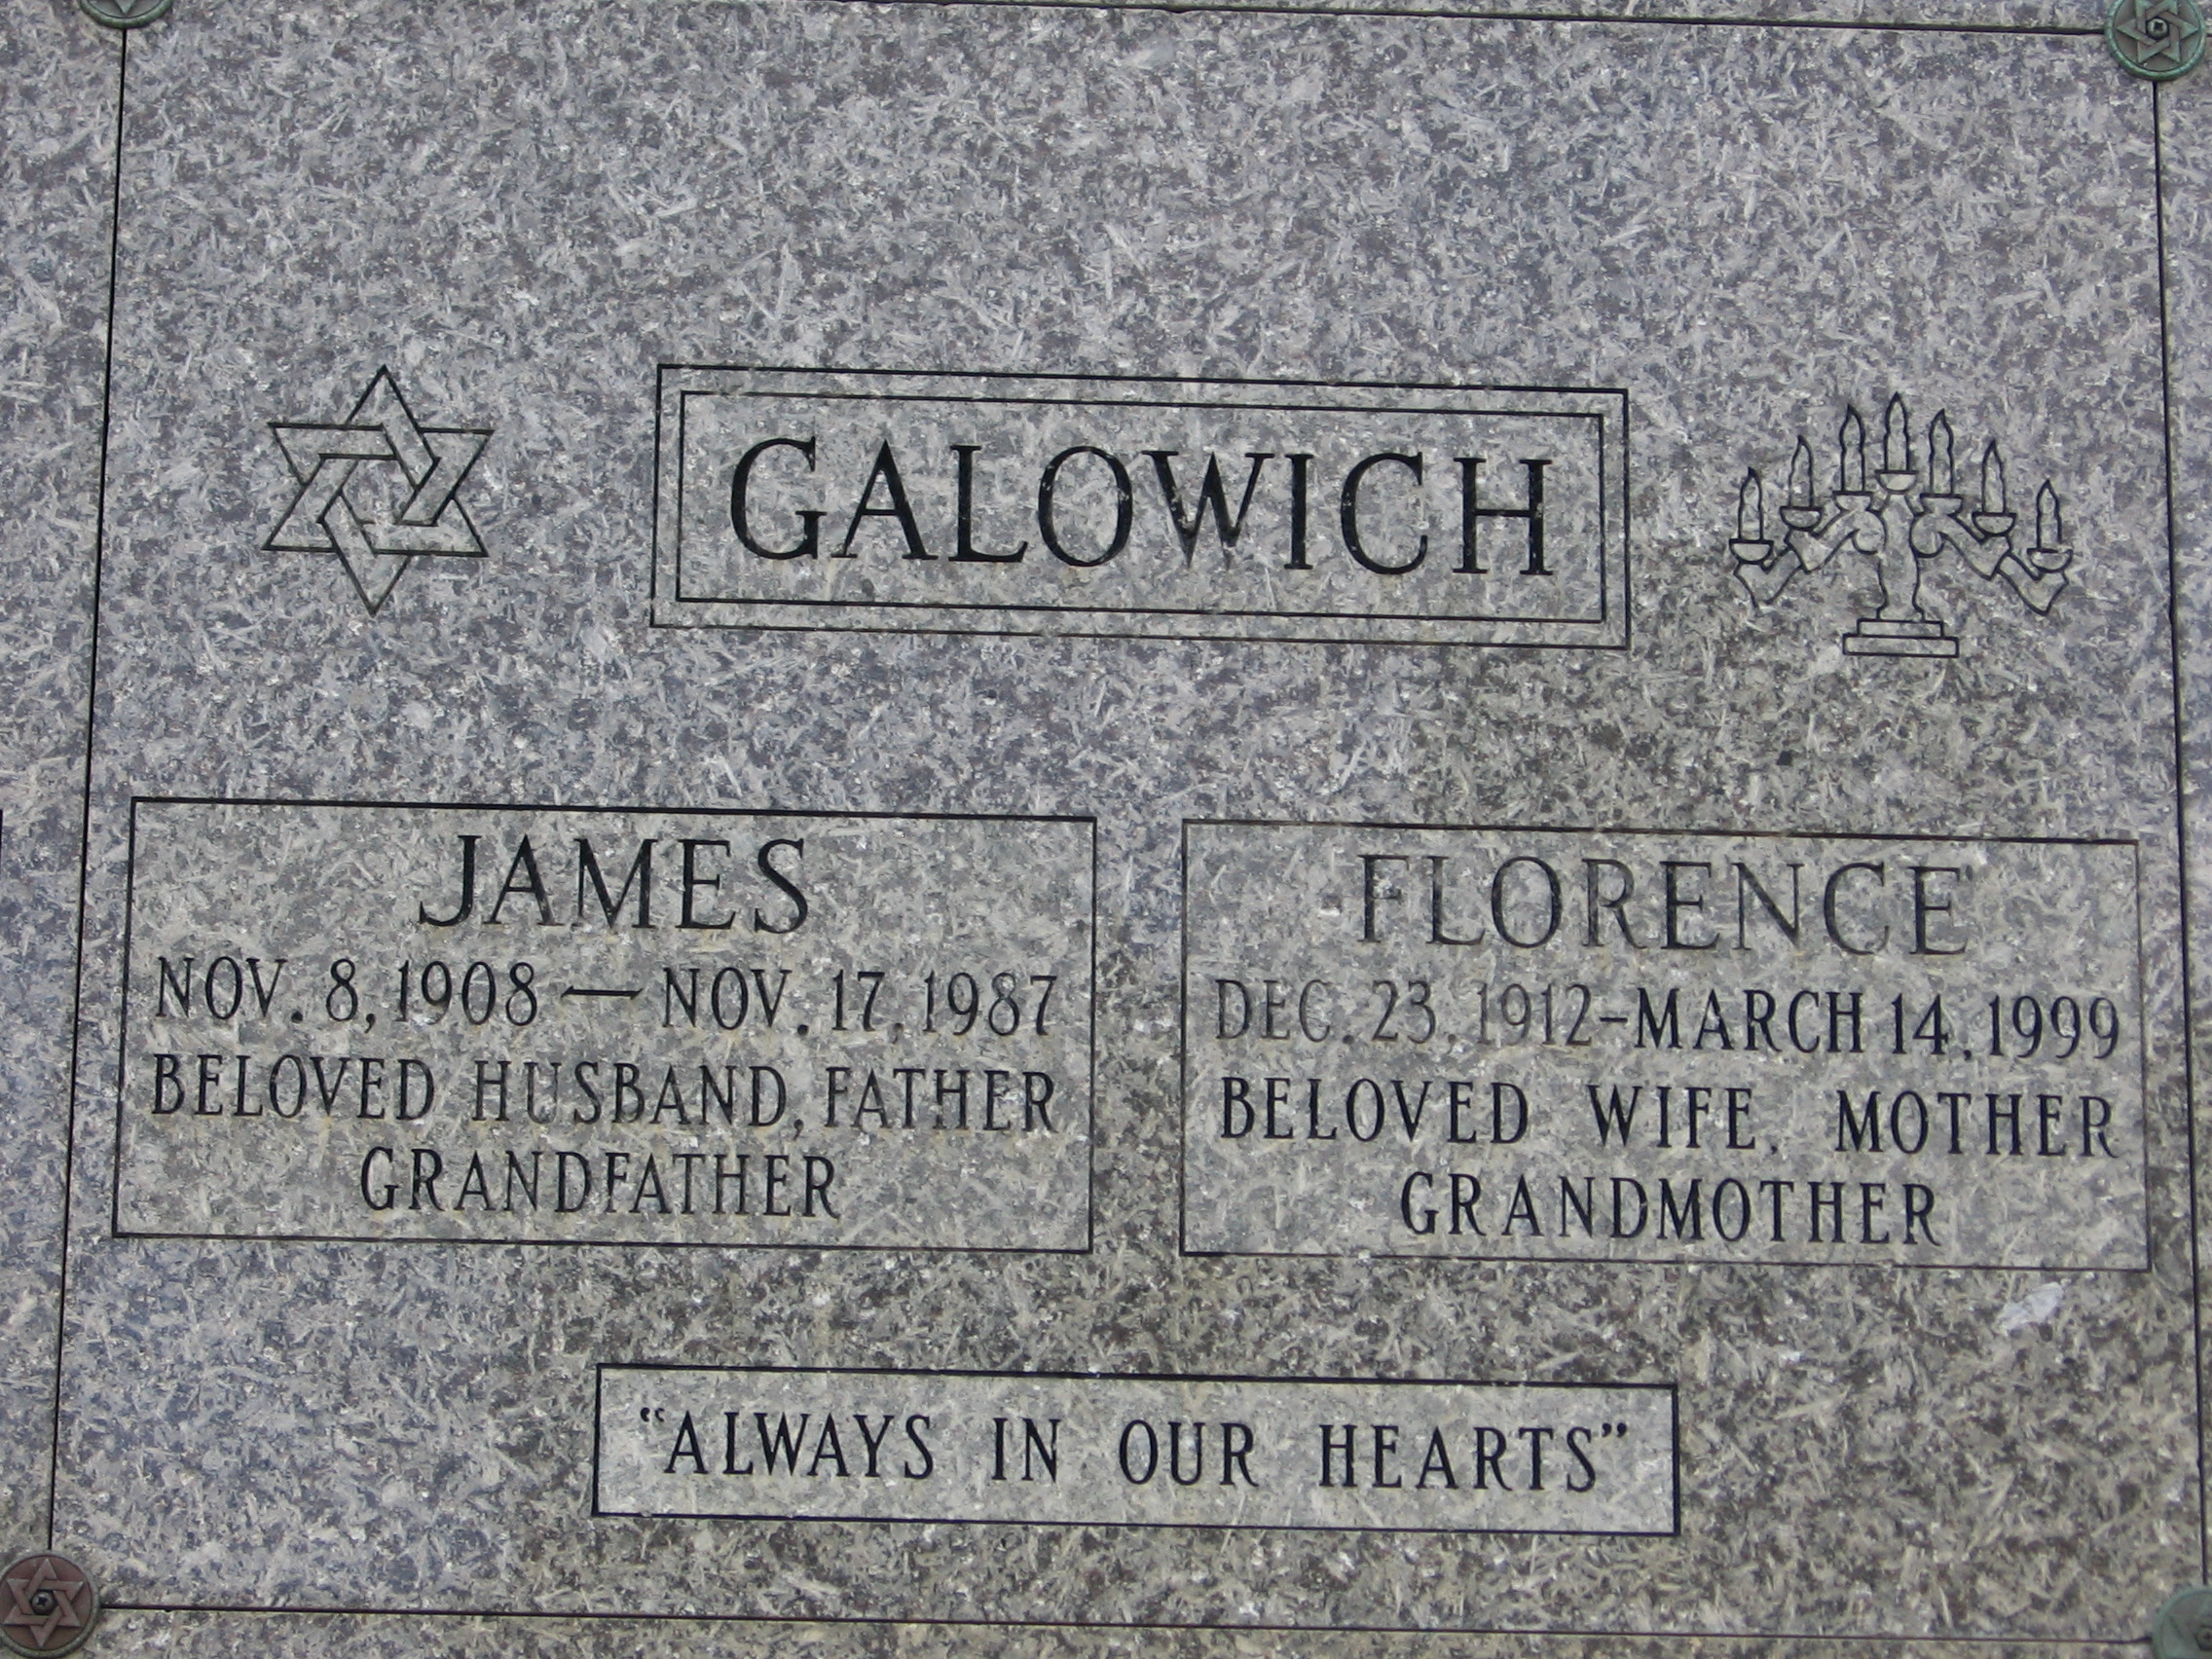 James Galowich